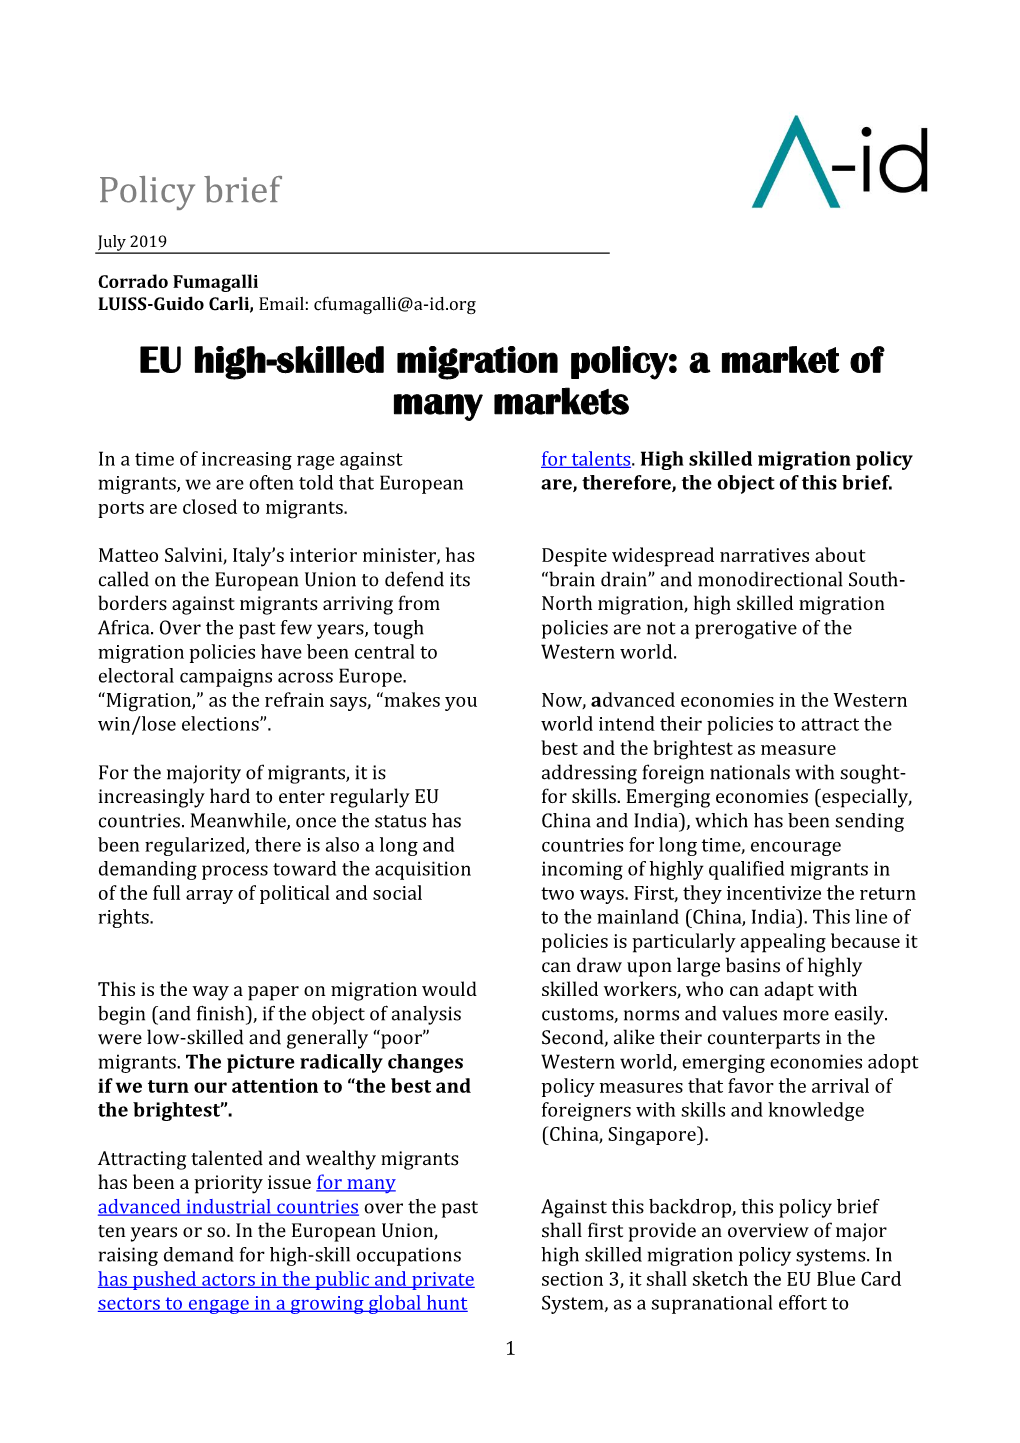 Policy Brief EU High-Skilled Migration Policy: a Market of Many Markets